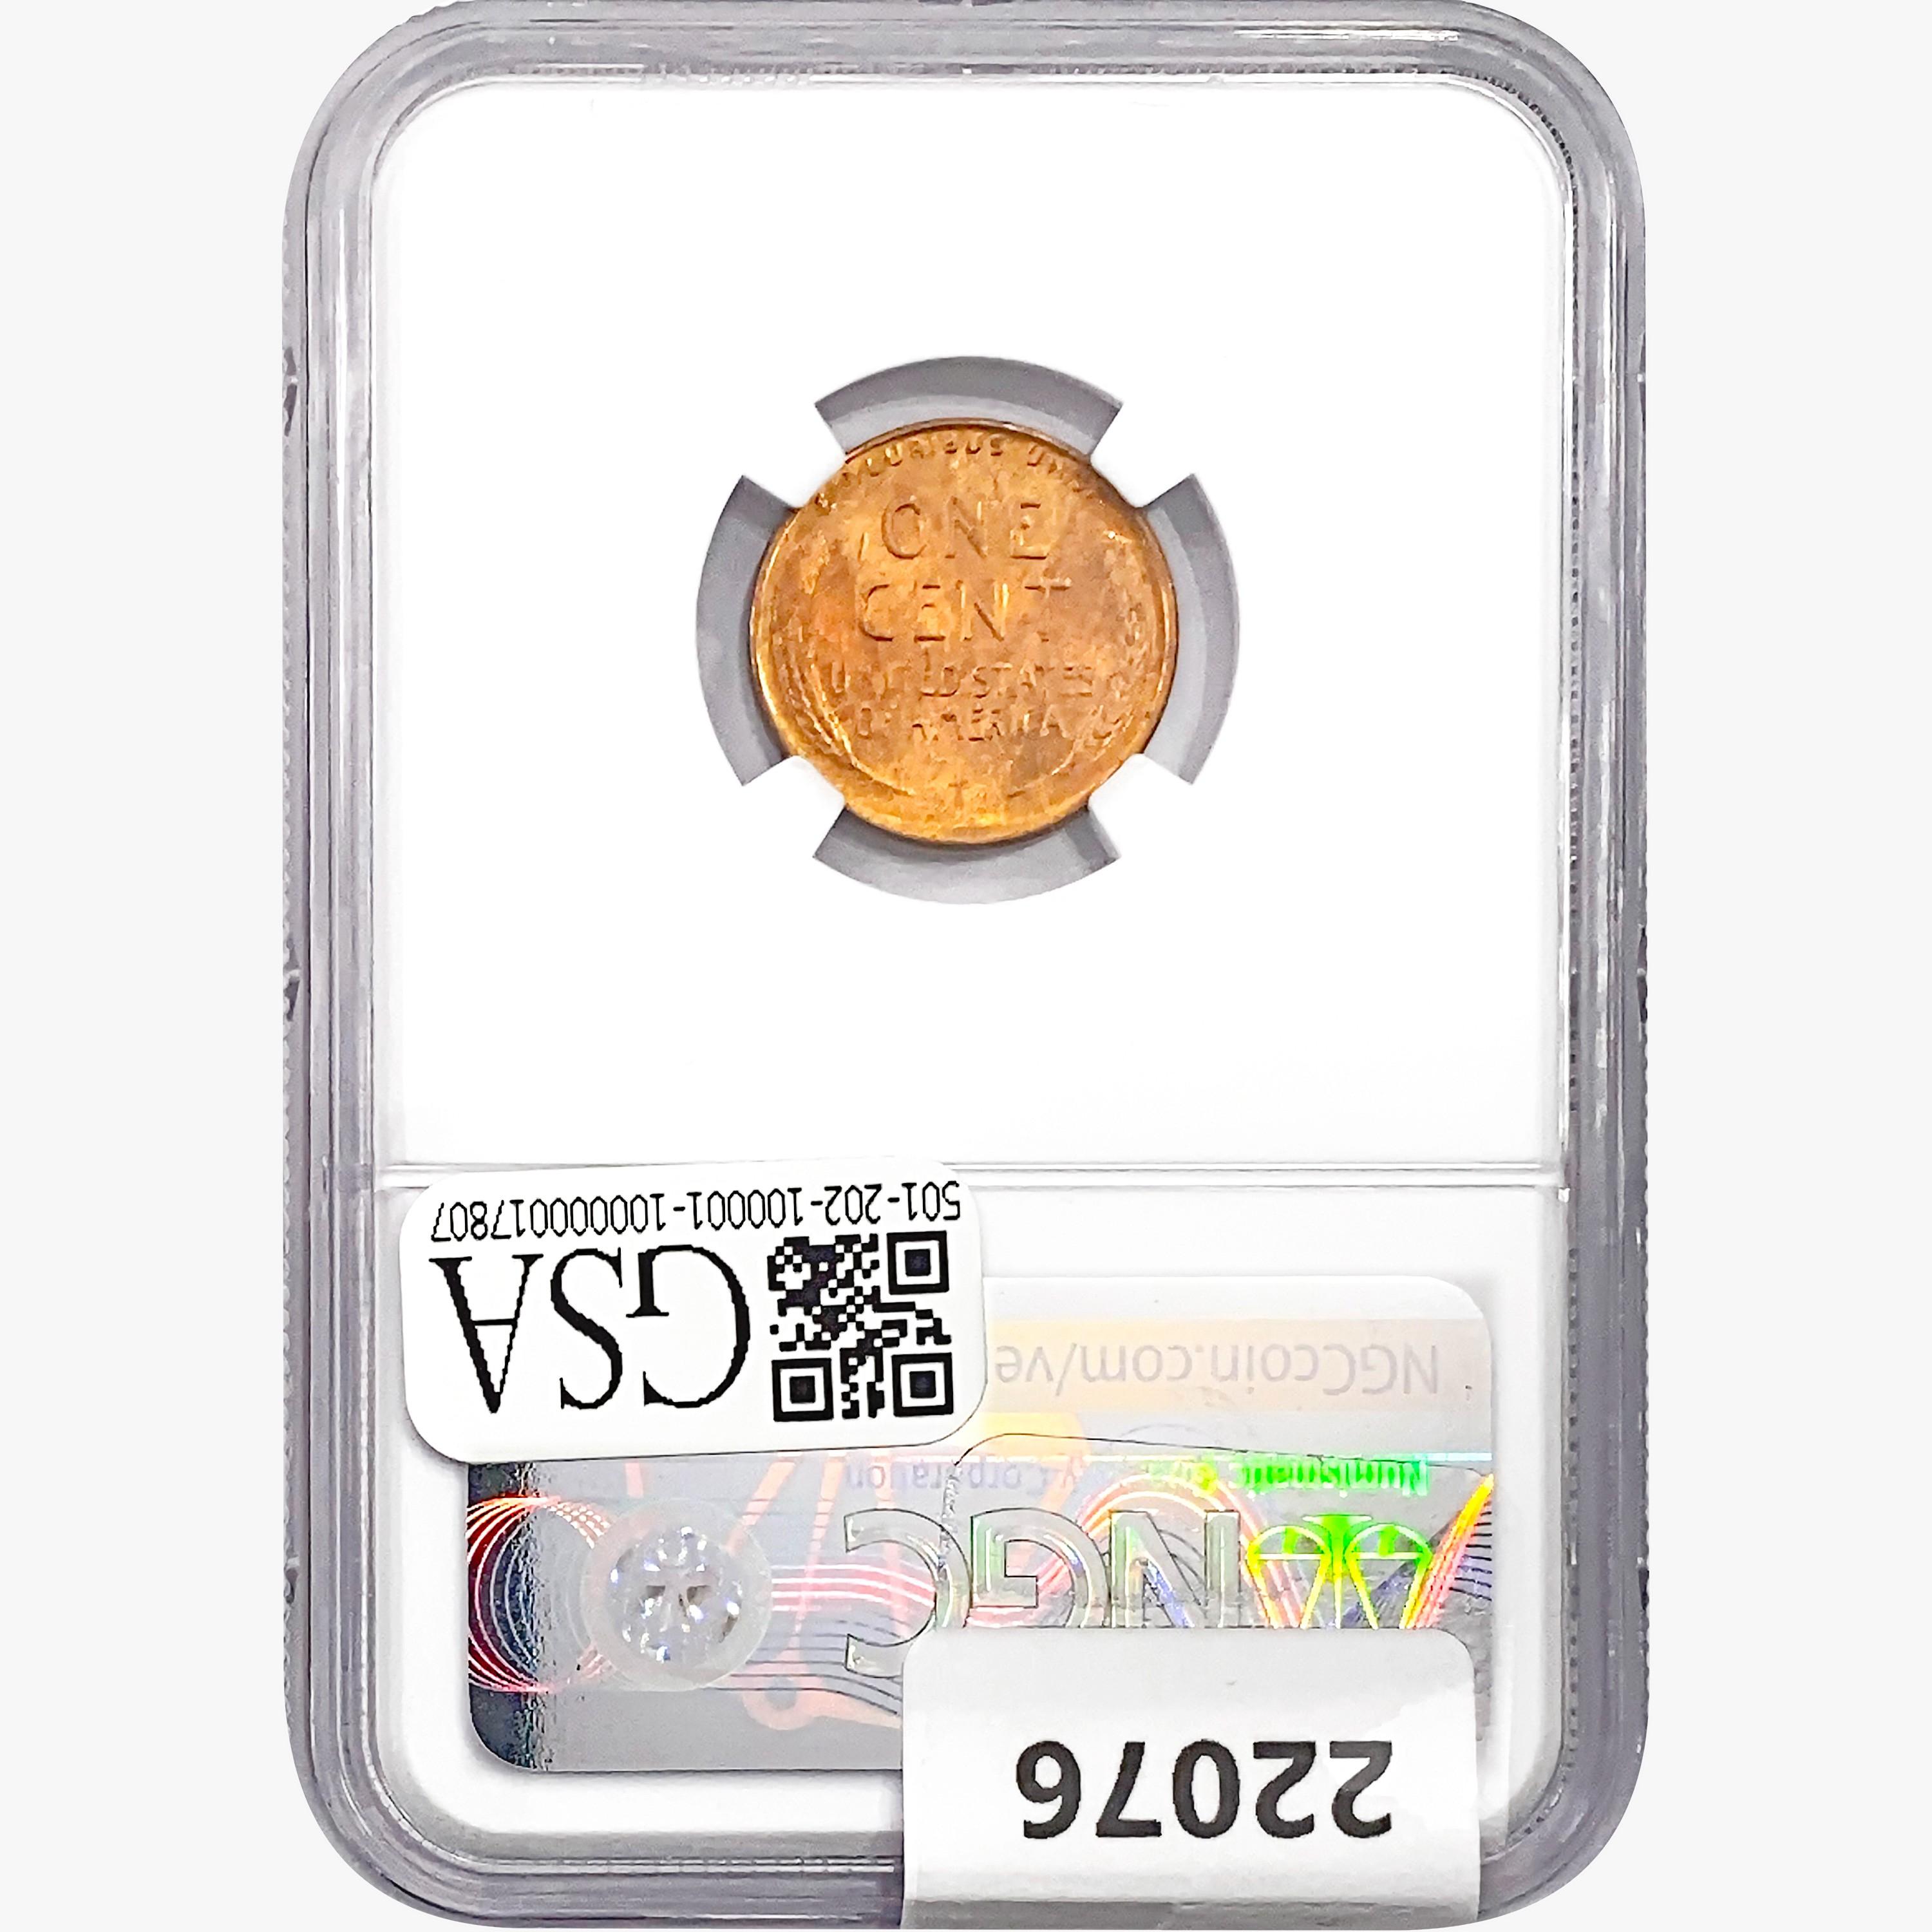 1945-S Wheat Cent NGC MS67 RD